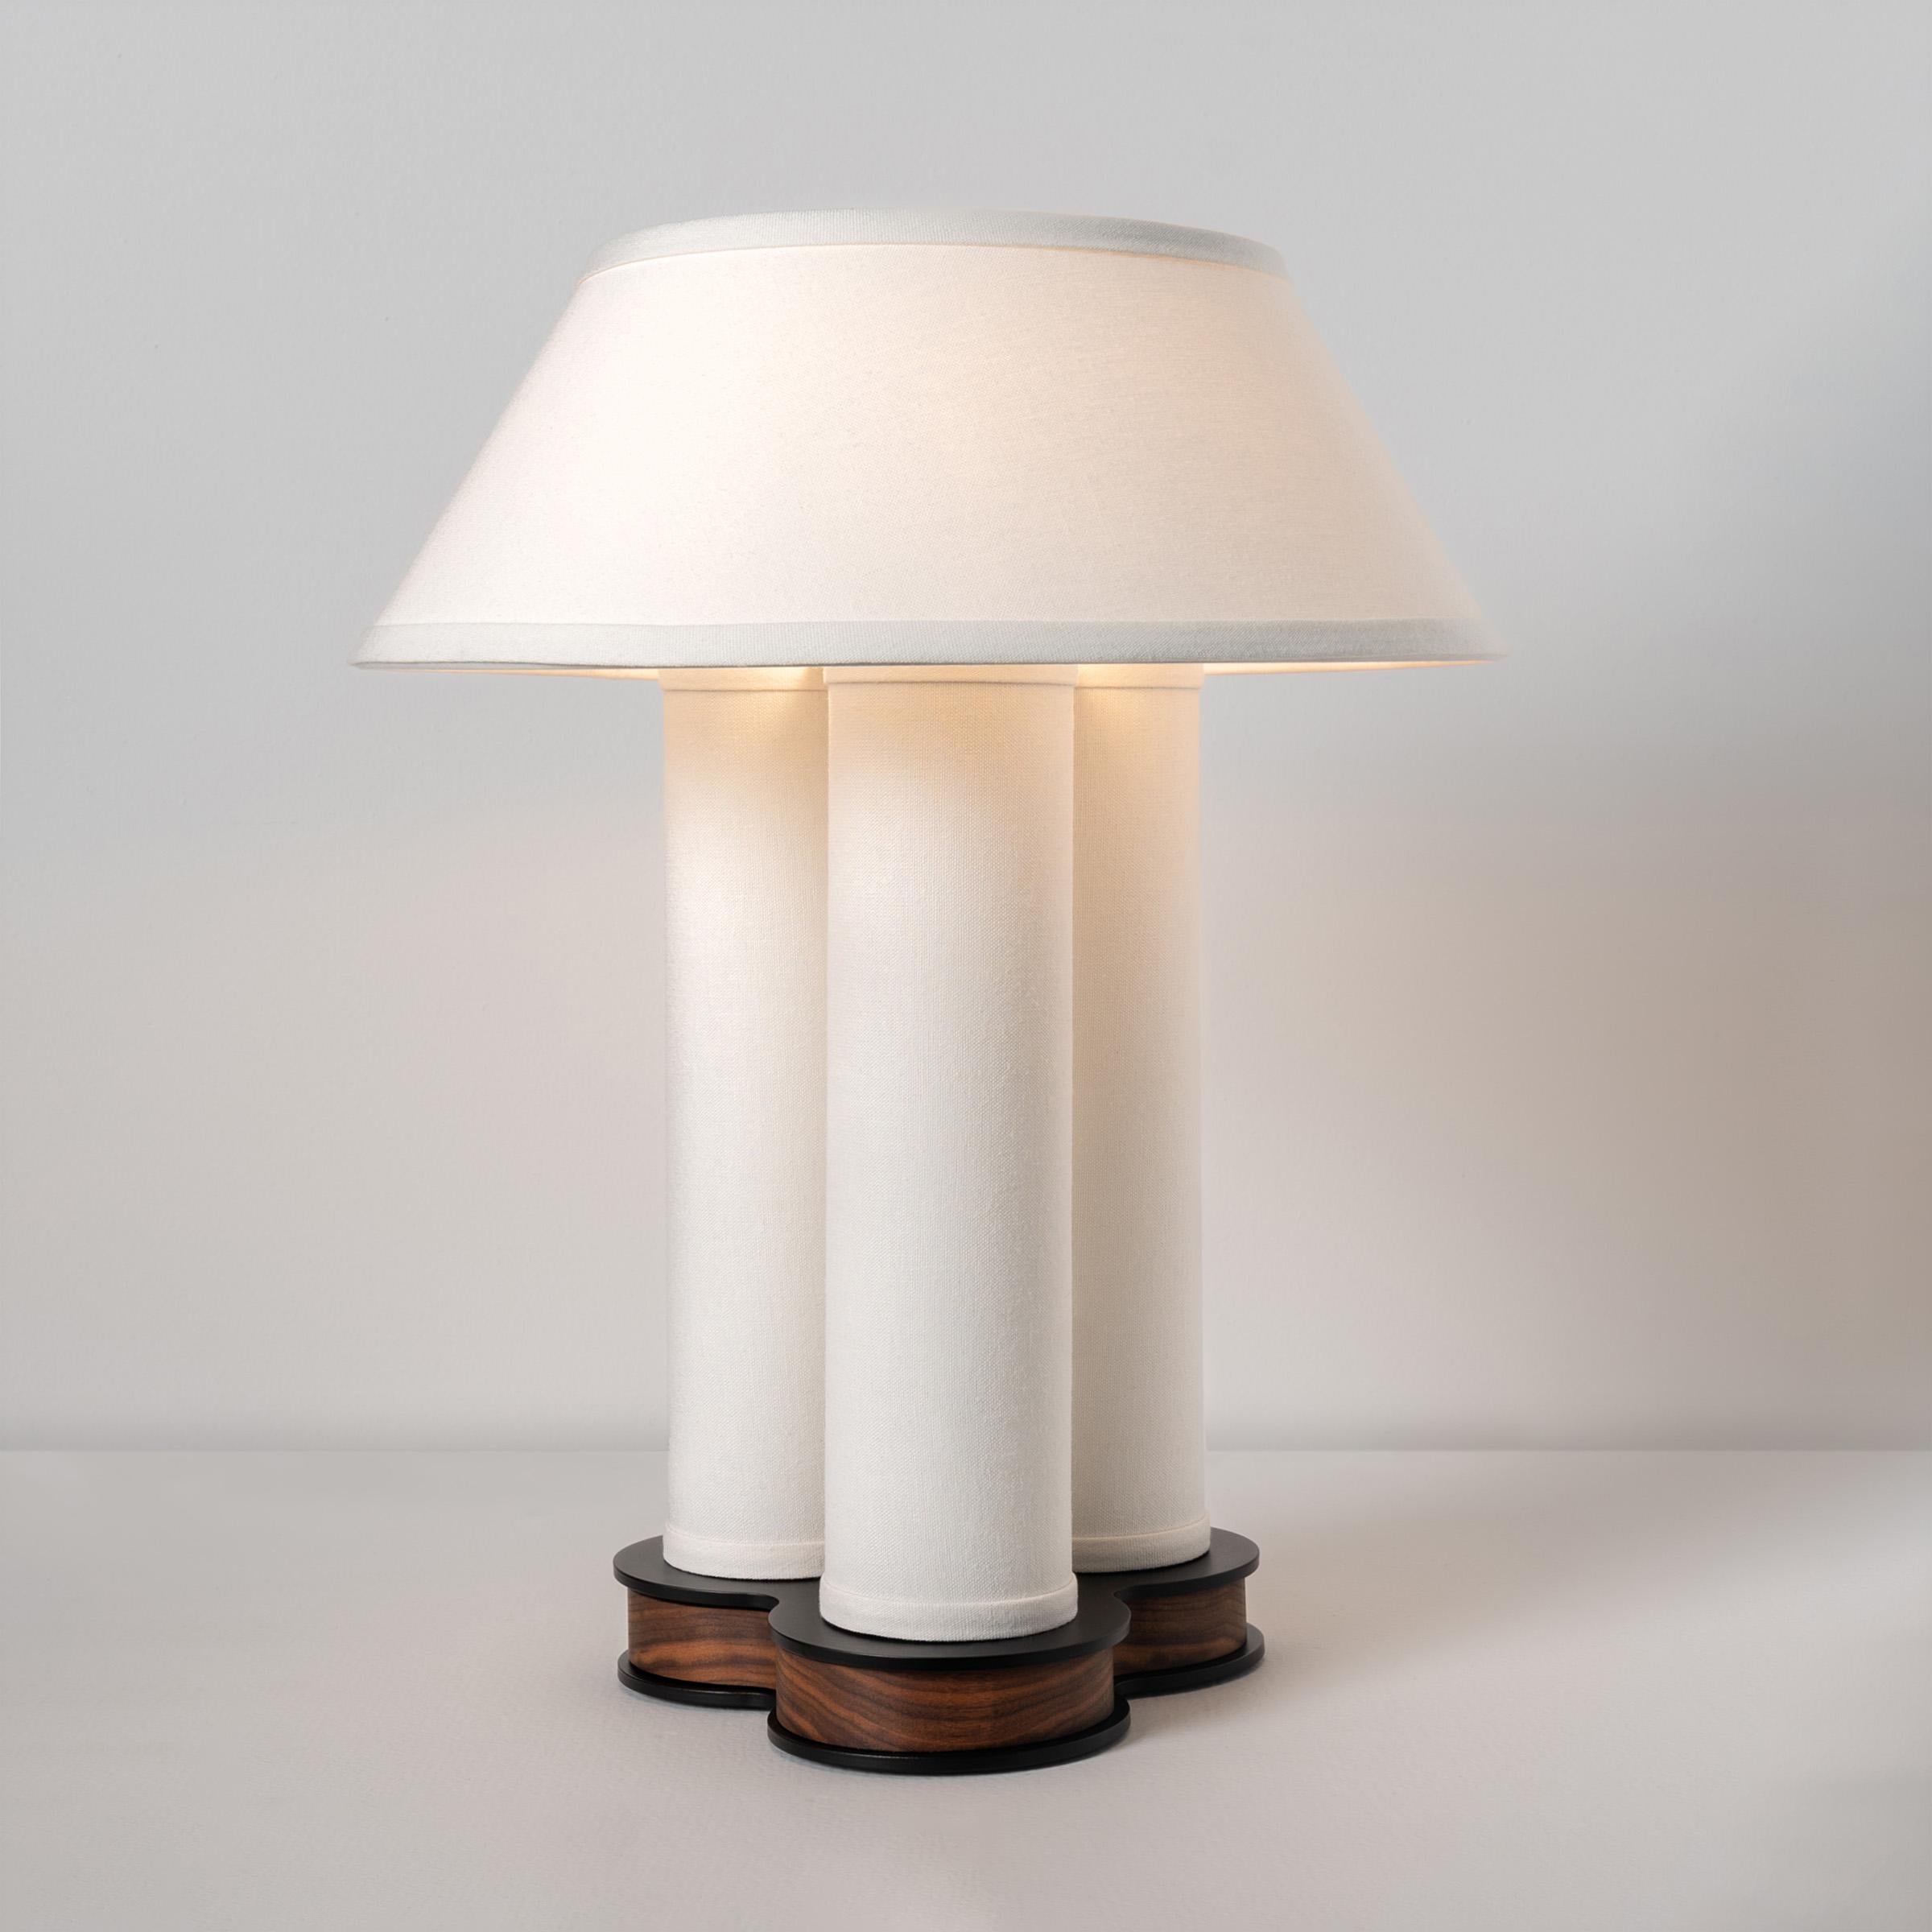 Pillaret Trio 18in Table Lamp by Studio Dunn In New Condition For Sale In Rumford, RI